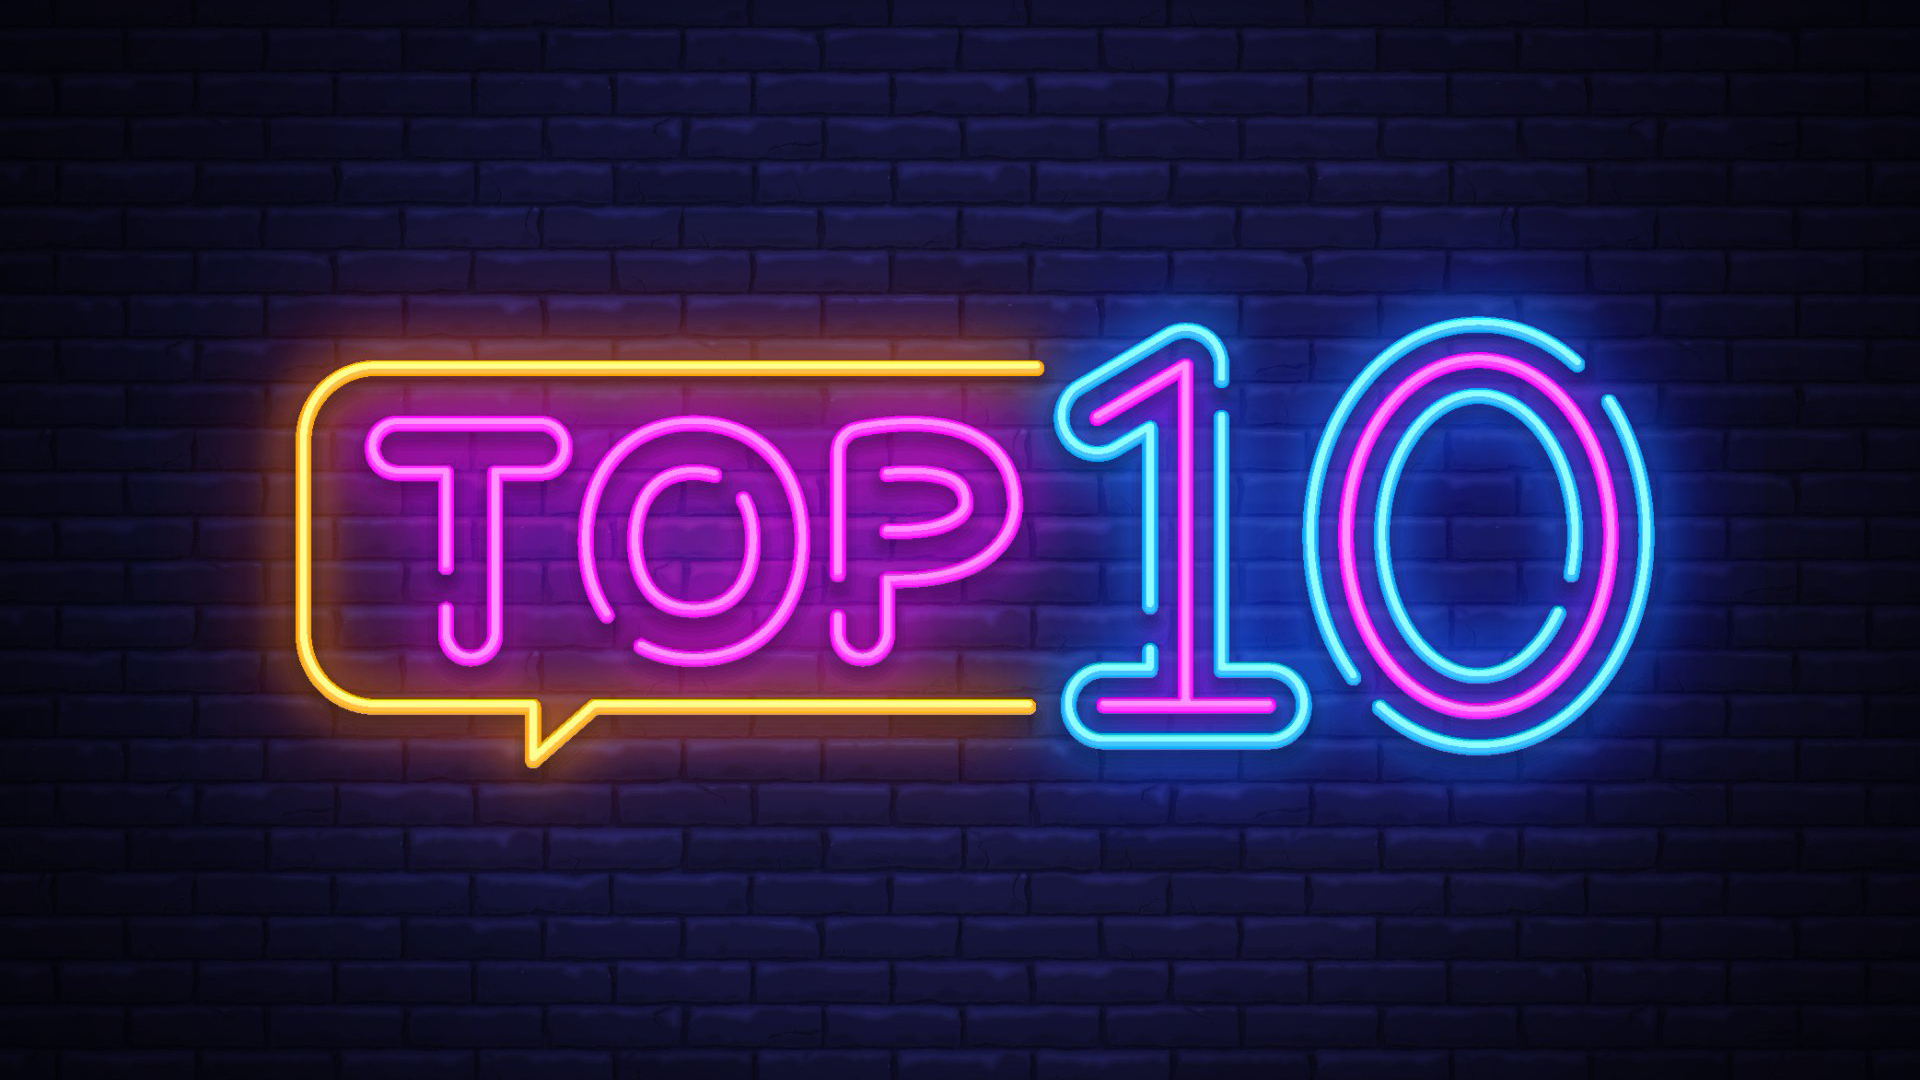 Graphic of a neon sign on a brick wall that spells Top 10